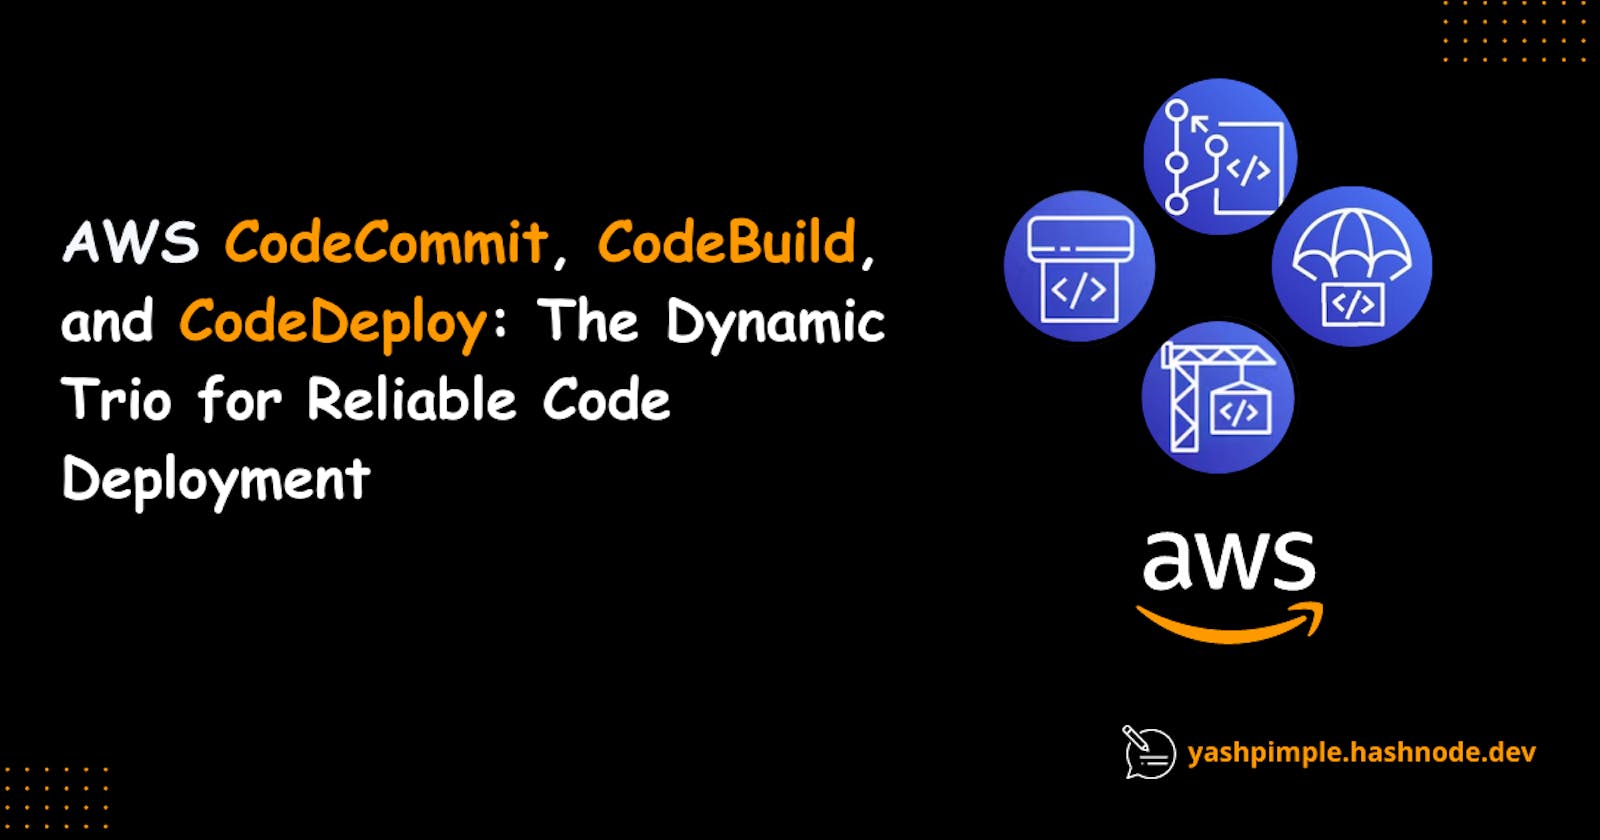 AWS CodeCommit, CodeBuild, and CodeDeploy: The Dynamic Trio for Reliable Code Deployment